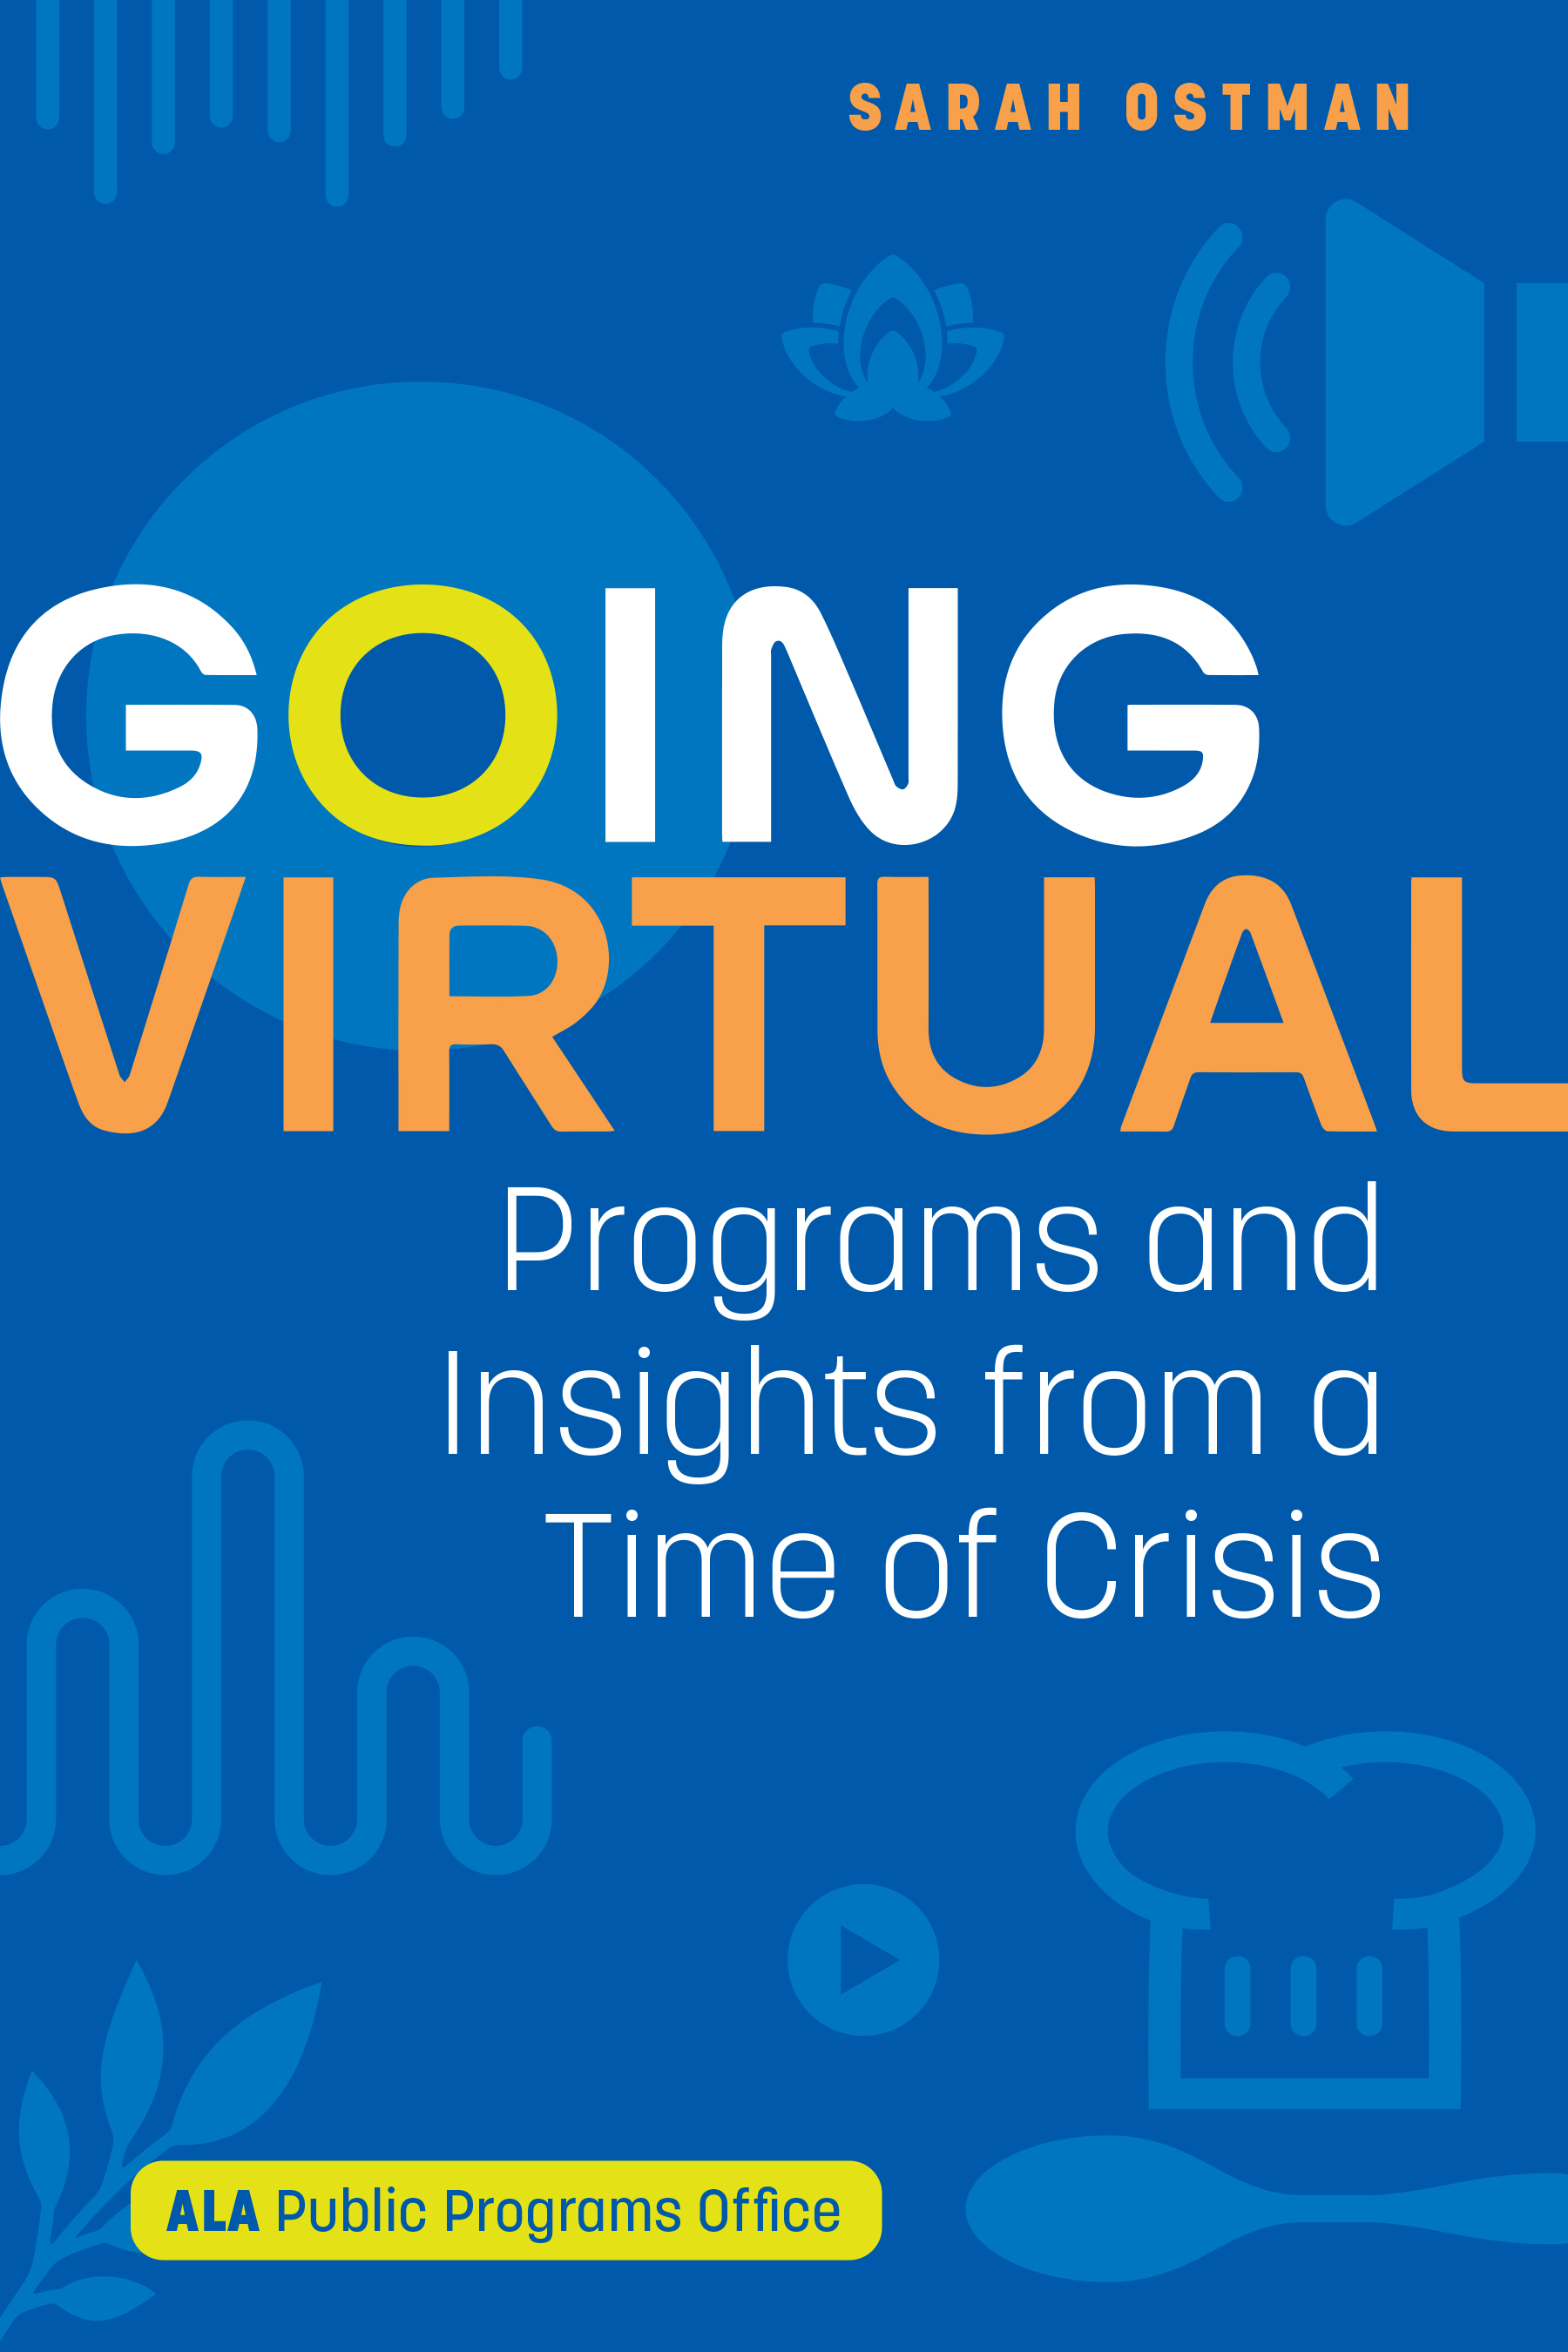  Programs and Insights from a Time of Crisis" 